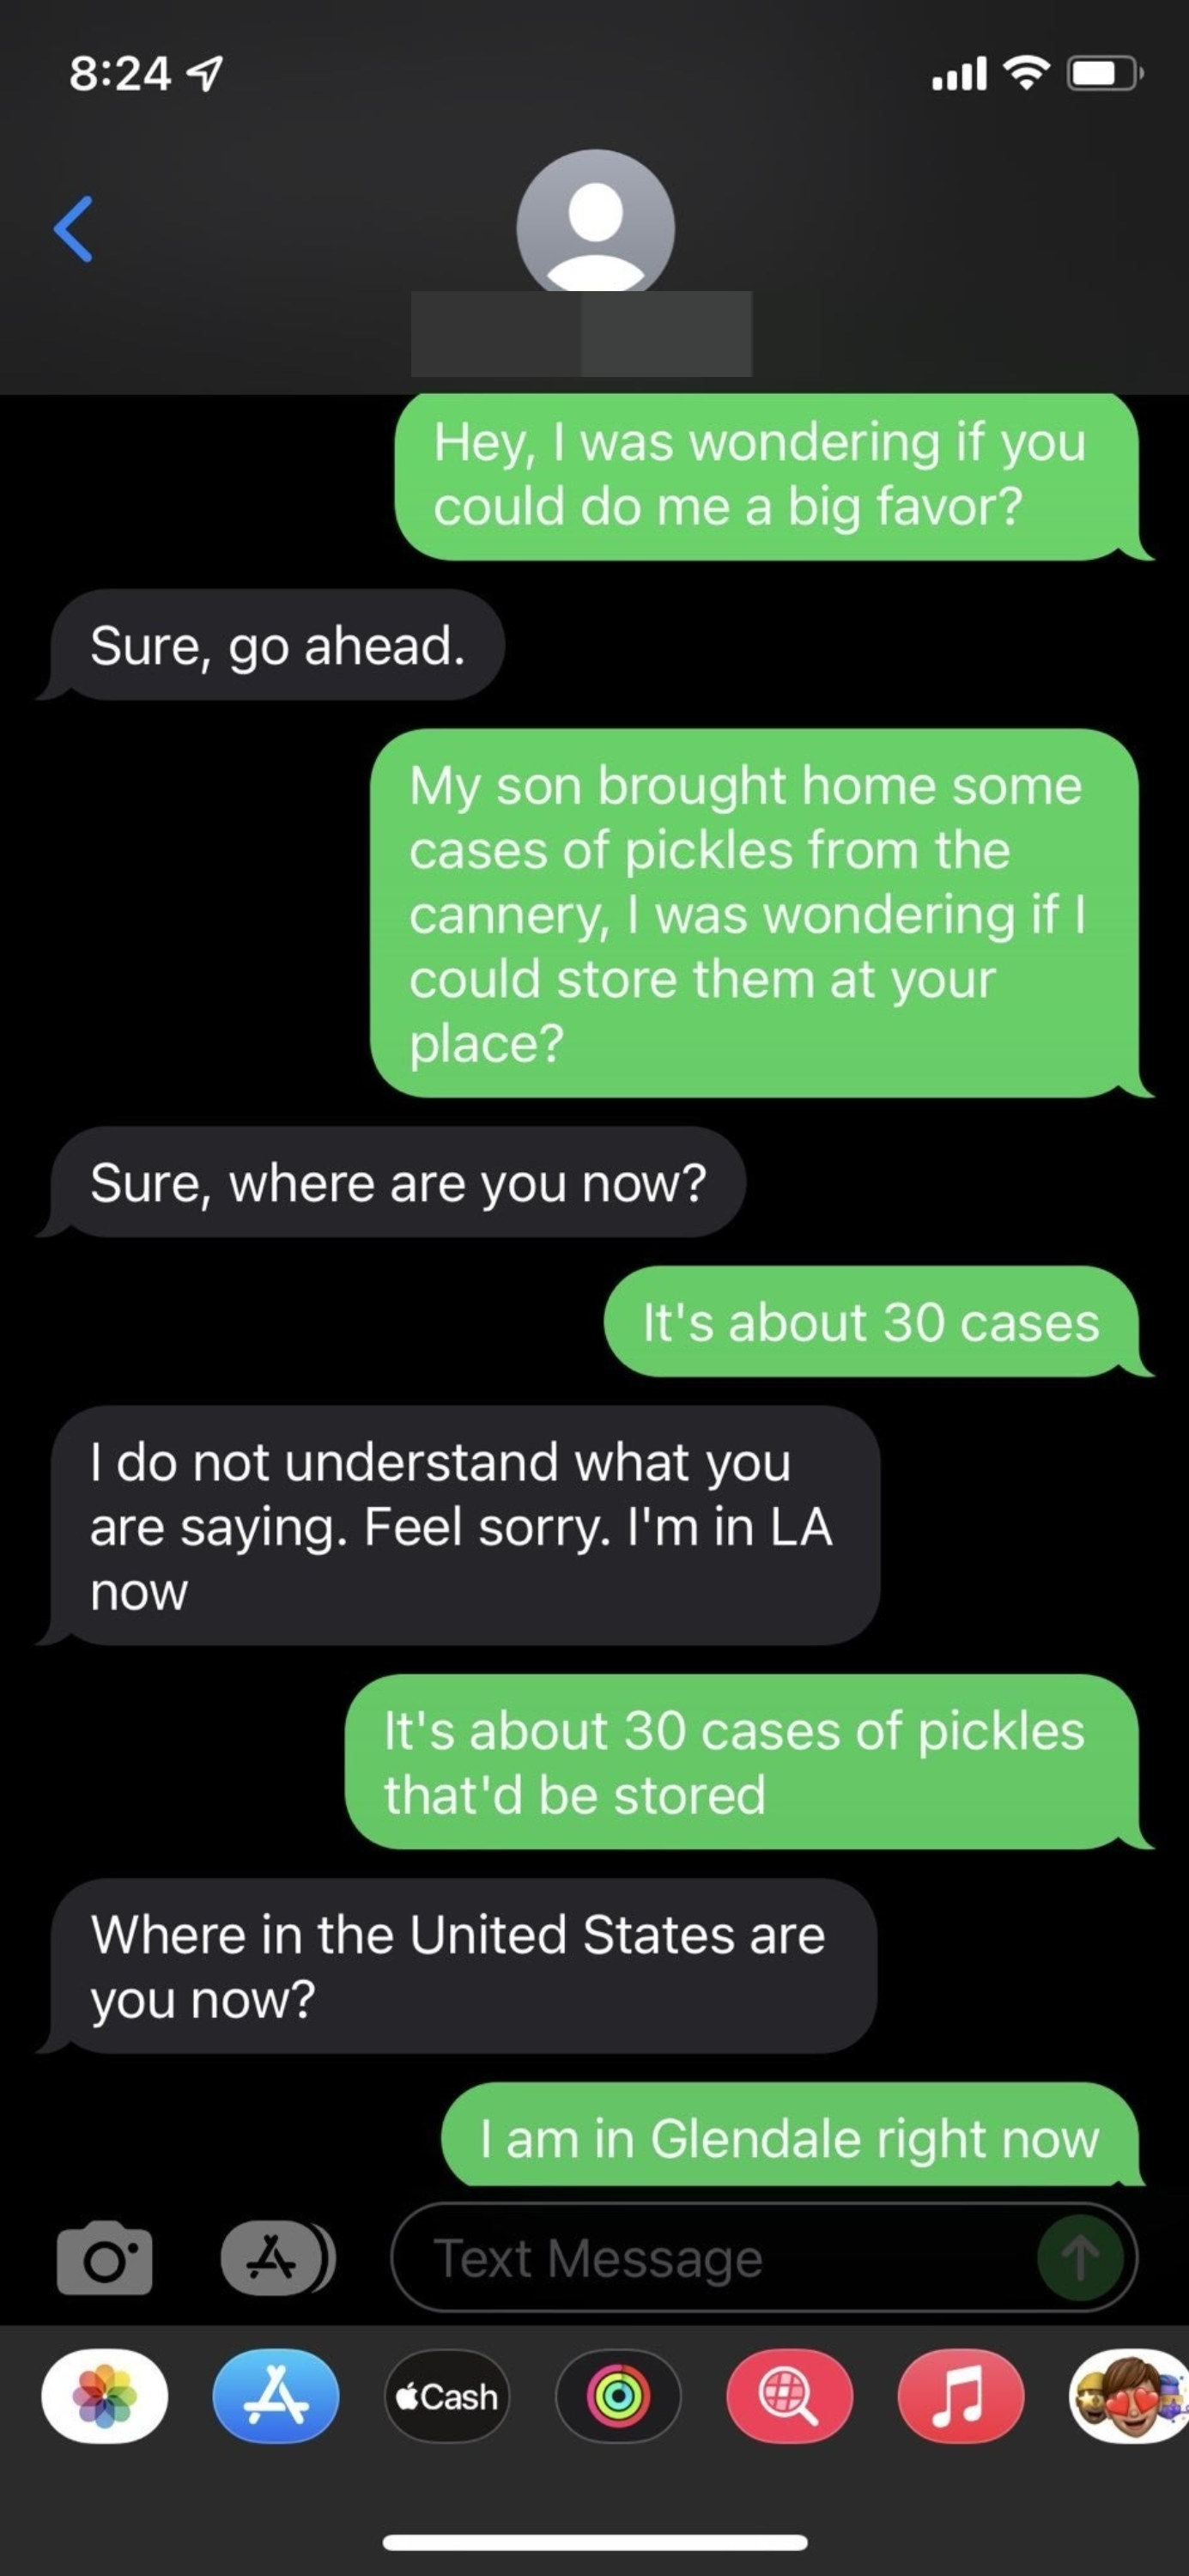 A person who keeps asking another person to store 30 cases of pickles